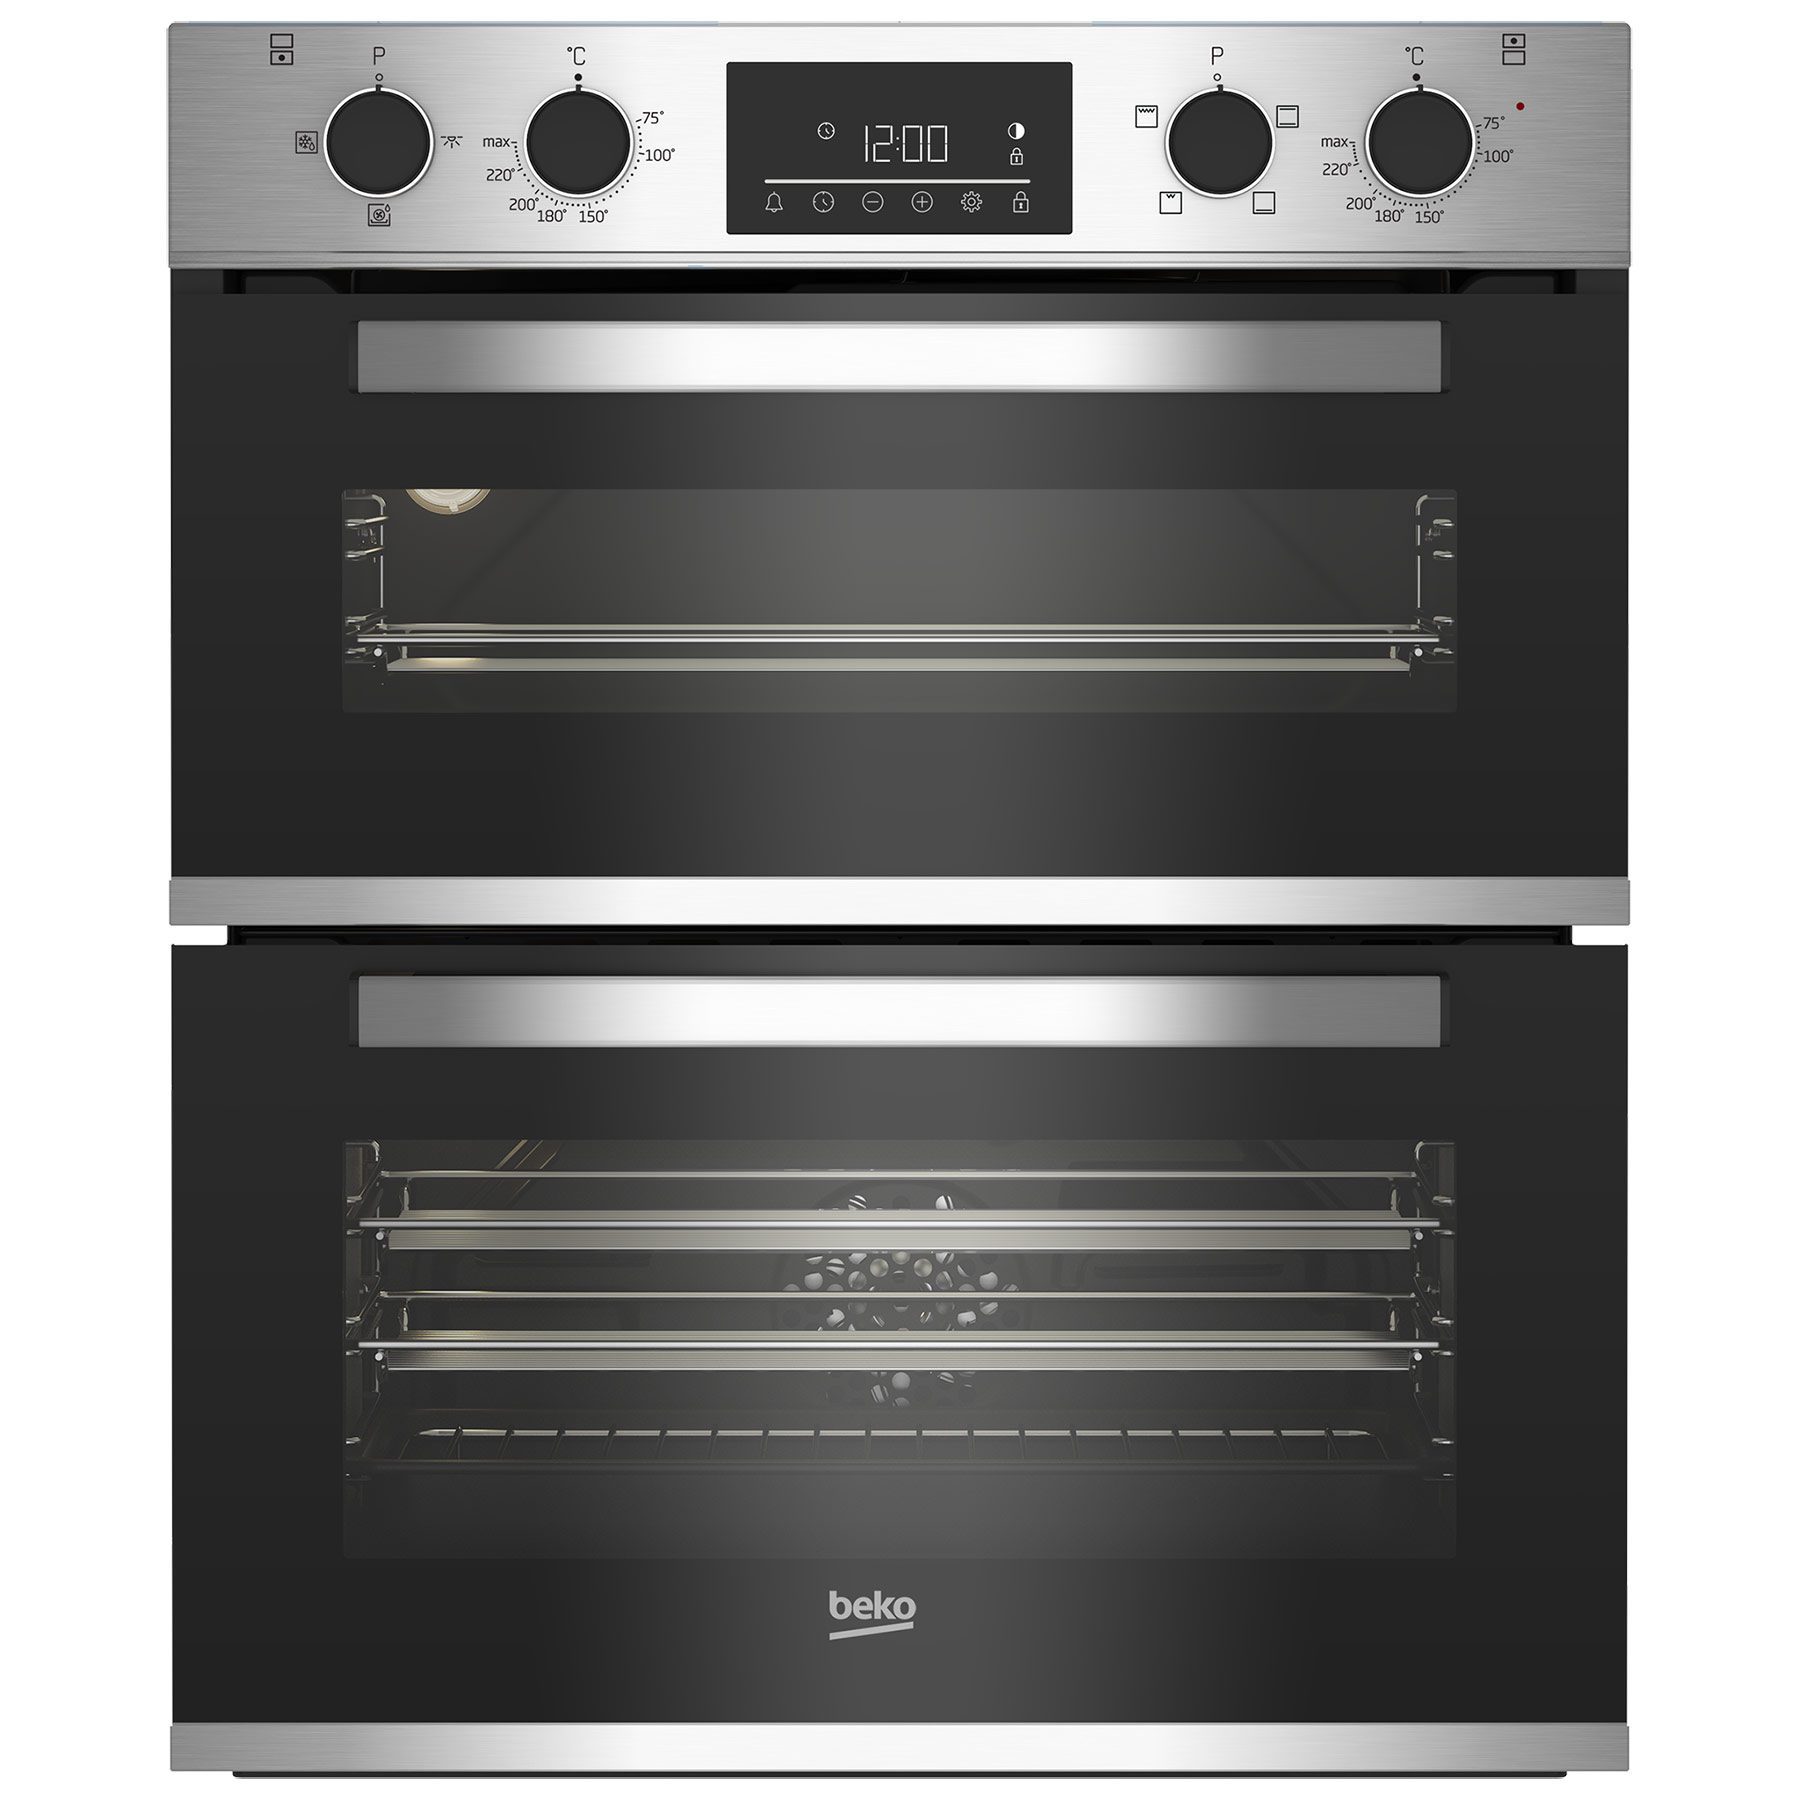 Beko CTFY22309X Built Under Electric Double Oven in St Steel A Rated